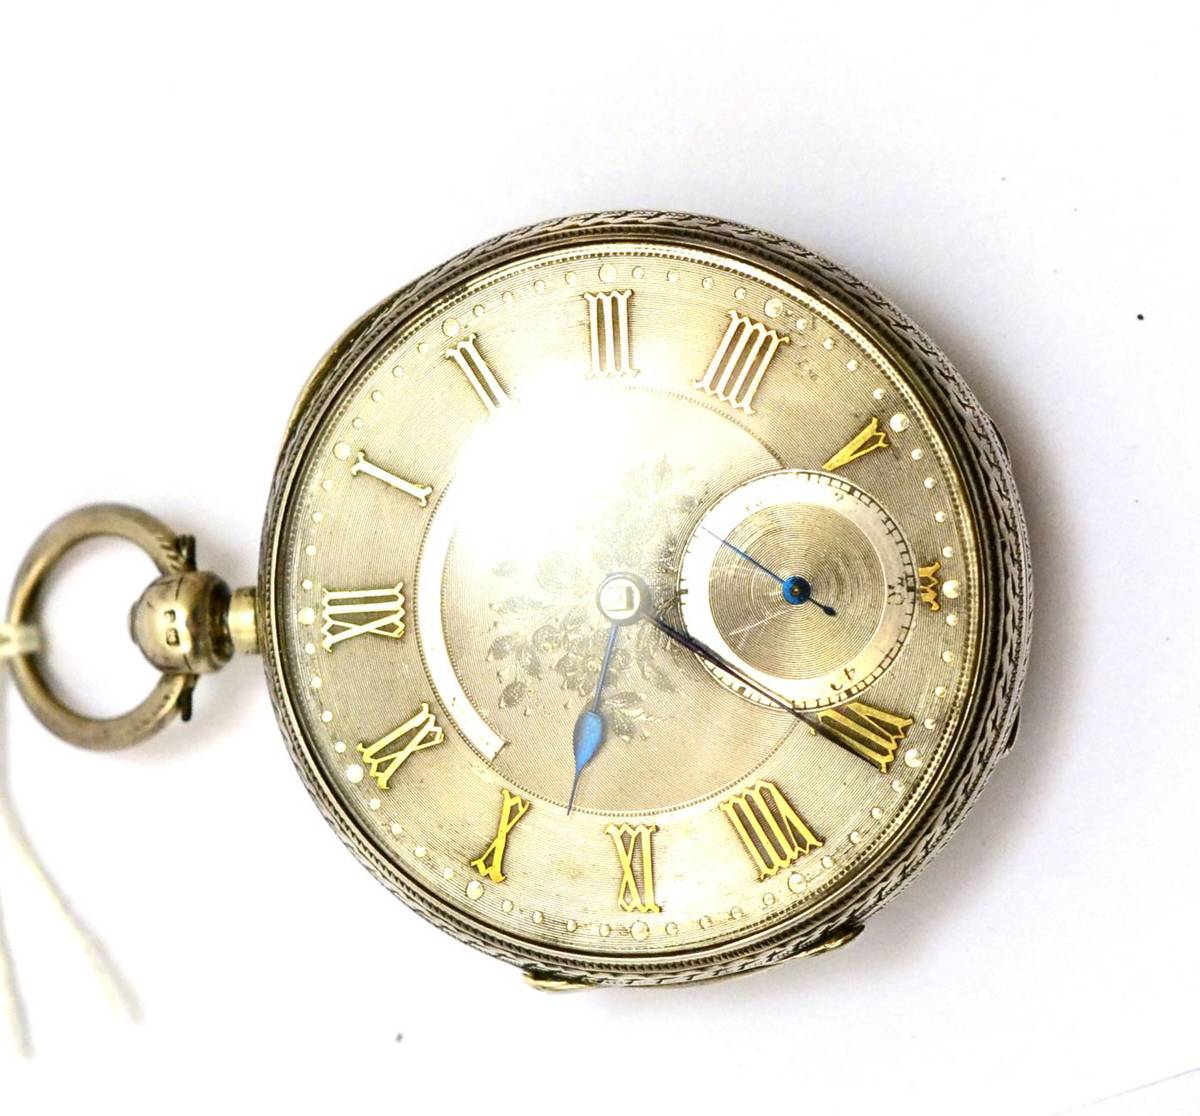 Lot 247 - A silver open faced pocket watch, signed John Forrest, London, 1898, lever movement with dust cover